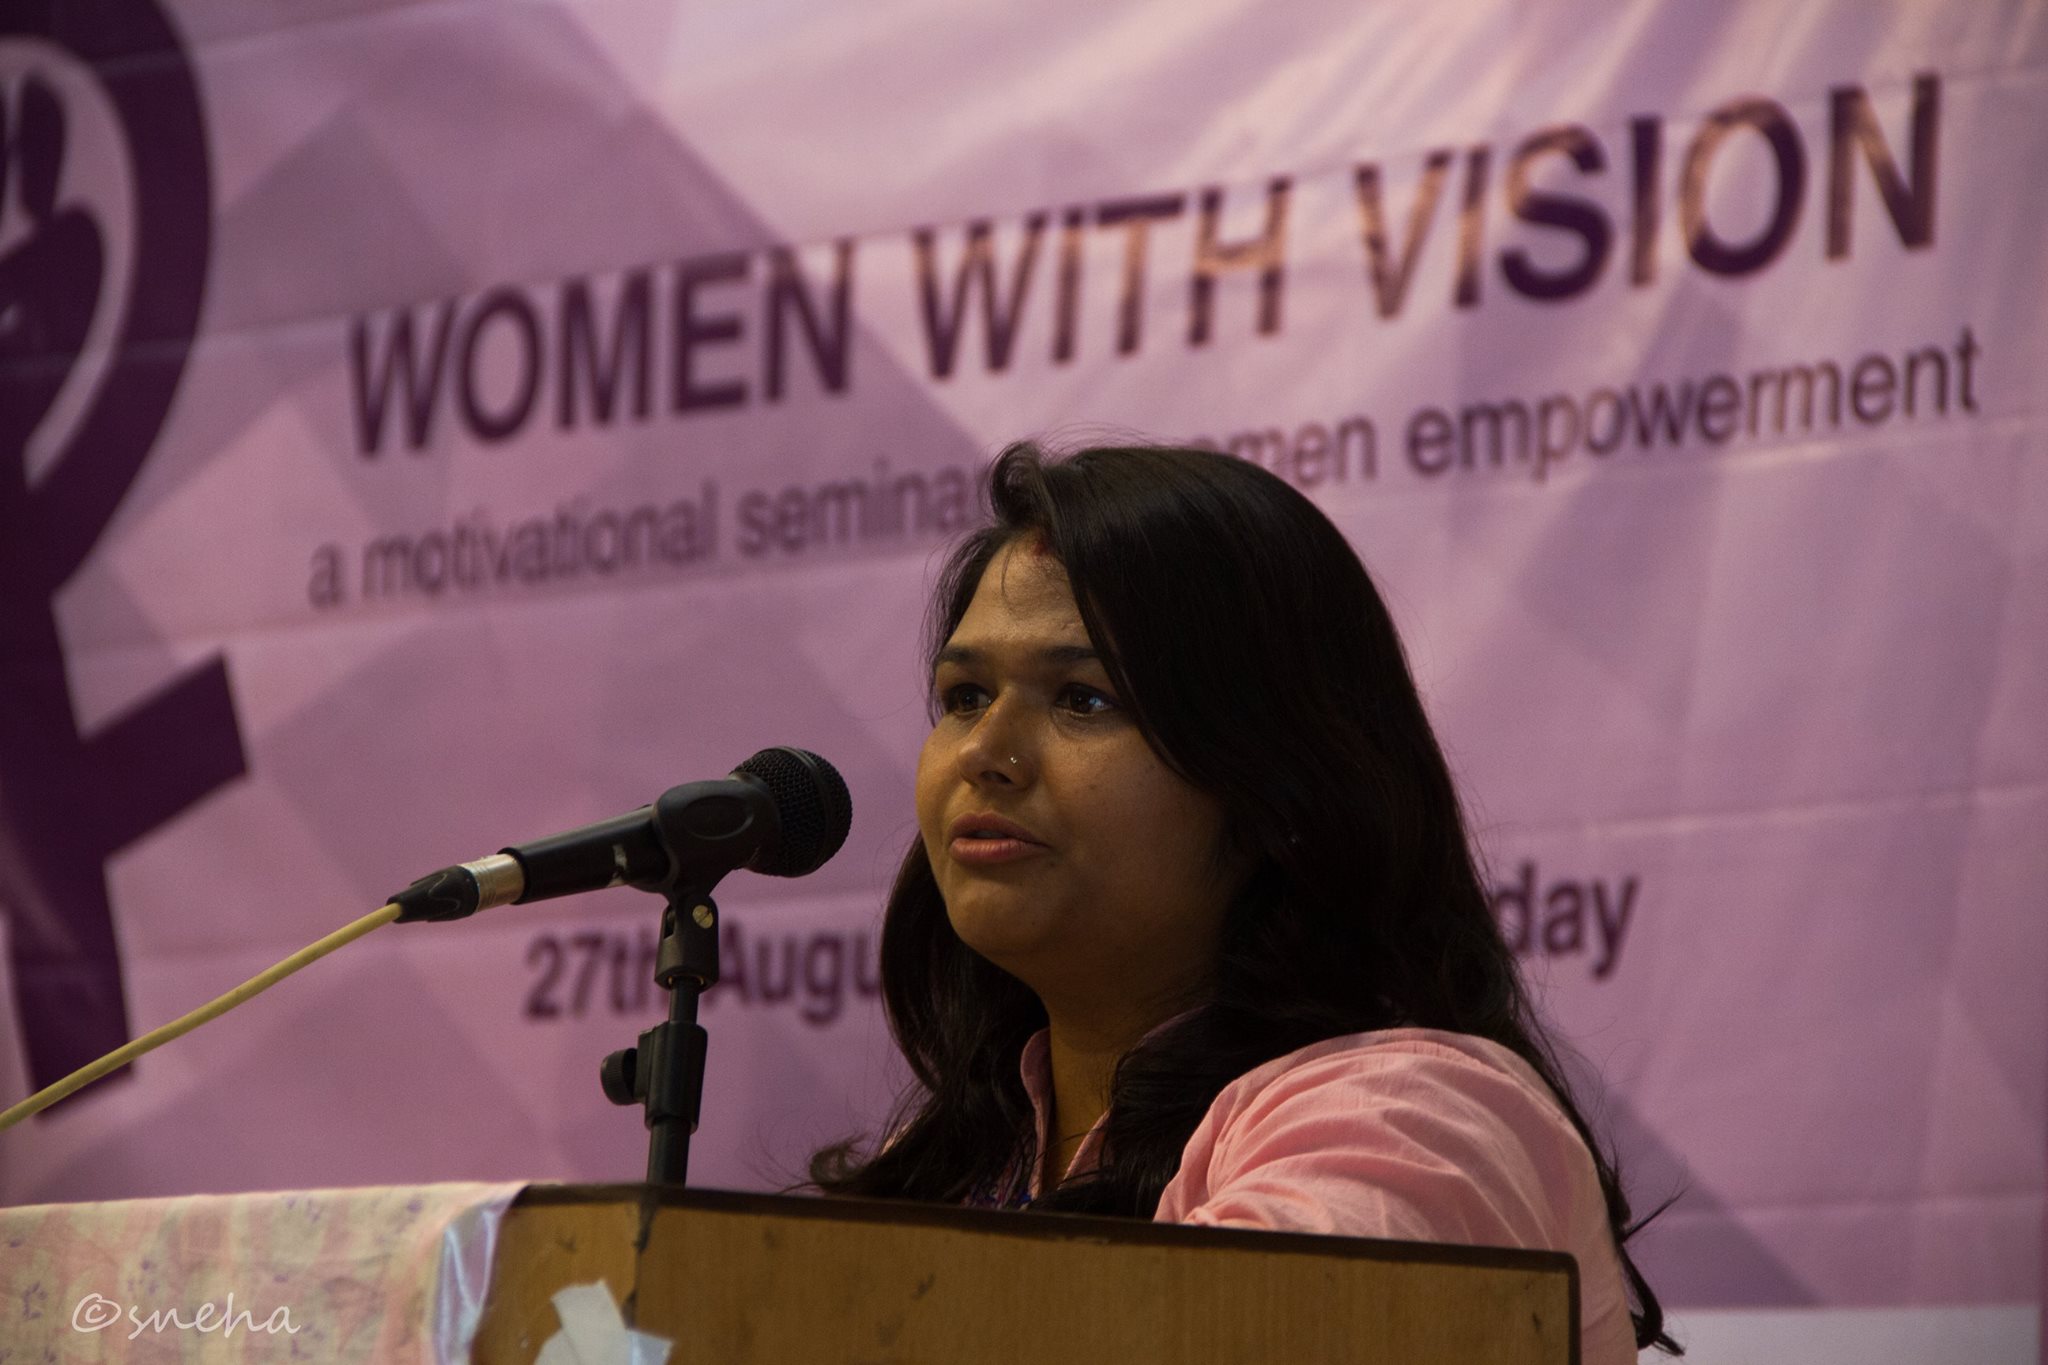 Women With Vision